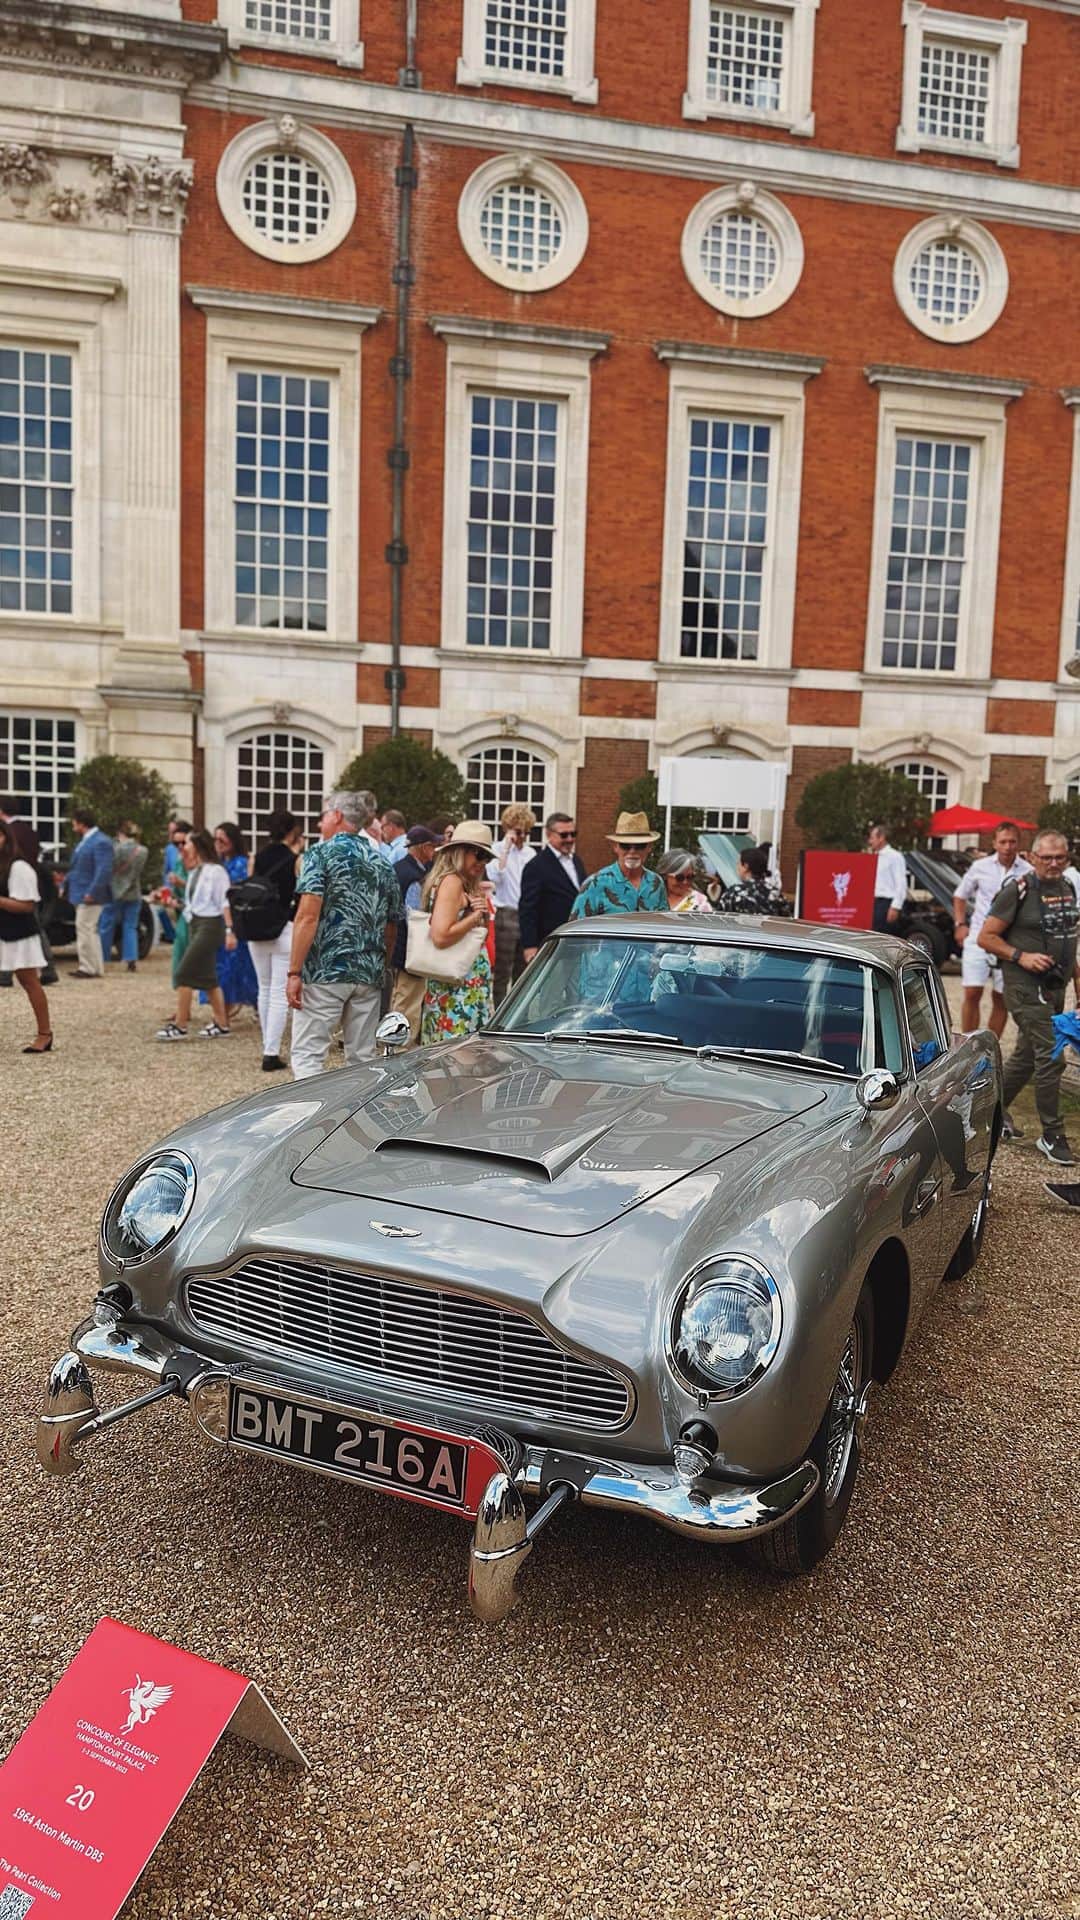 @LONDON | TAG #THISISLONDONのインスタグラム：「@MrLondon at @Concours_of_Elegance in the original #JamesBond #AstonMartinDB5 from #Thunderball! 🤩🤯 It has a bullet-proof shield at the rear, machine guns at the front, and it feels pretty special to sit where Sir Sean Connery once sat. The centre console has a radar and there’s buttons to rotate the number plate on demand! Very cool! I’m a very happy man indeed! Thanks to @therealpearlcollection for letting me have a look around!! 🙏🏼🙏🏼  ___________________________________________  #thisislondon #lovelondon #london #londra #londonlife #londres #uk #visitlondon #british #🇬🇧 #carsoflondon #supercarsoflondon #supercar #supercars #londoncars #classiccar #classiccars #britishcars #🚙 #astonmartin #concoursofelegance #hamptoncourtpalace #007」